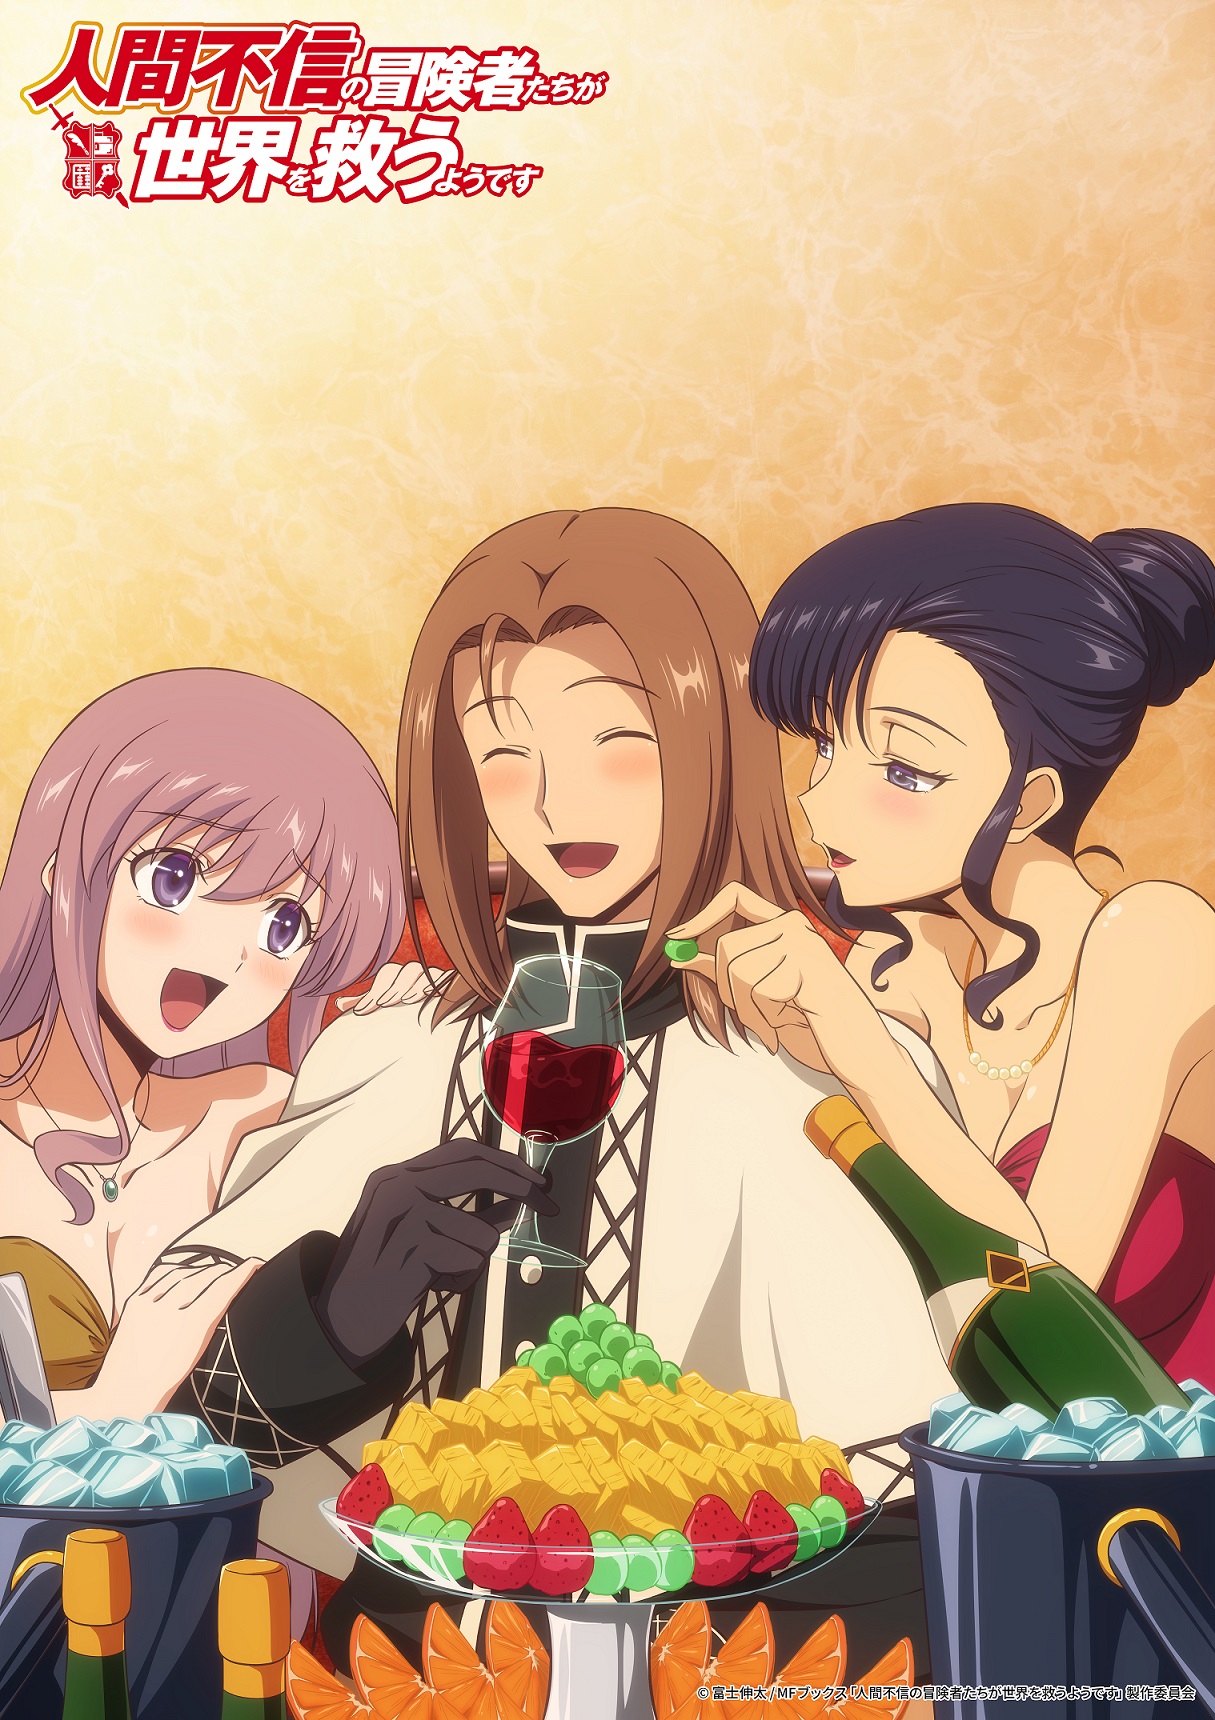 Surrounded by a lavish fruit platter and ice buckets filled with bottles of fine wine, the former priest Zem laughs and blushes while sampling a glass of red wine and being fawned over by a pair of pretty cabaret girls in a new key visual for the upcoming Ningen Fushin: Adventurers Who Don't Believe in Humanity Will Save the World TV anime.